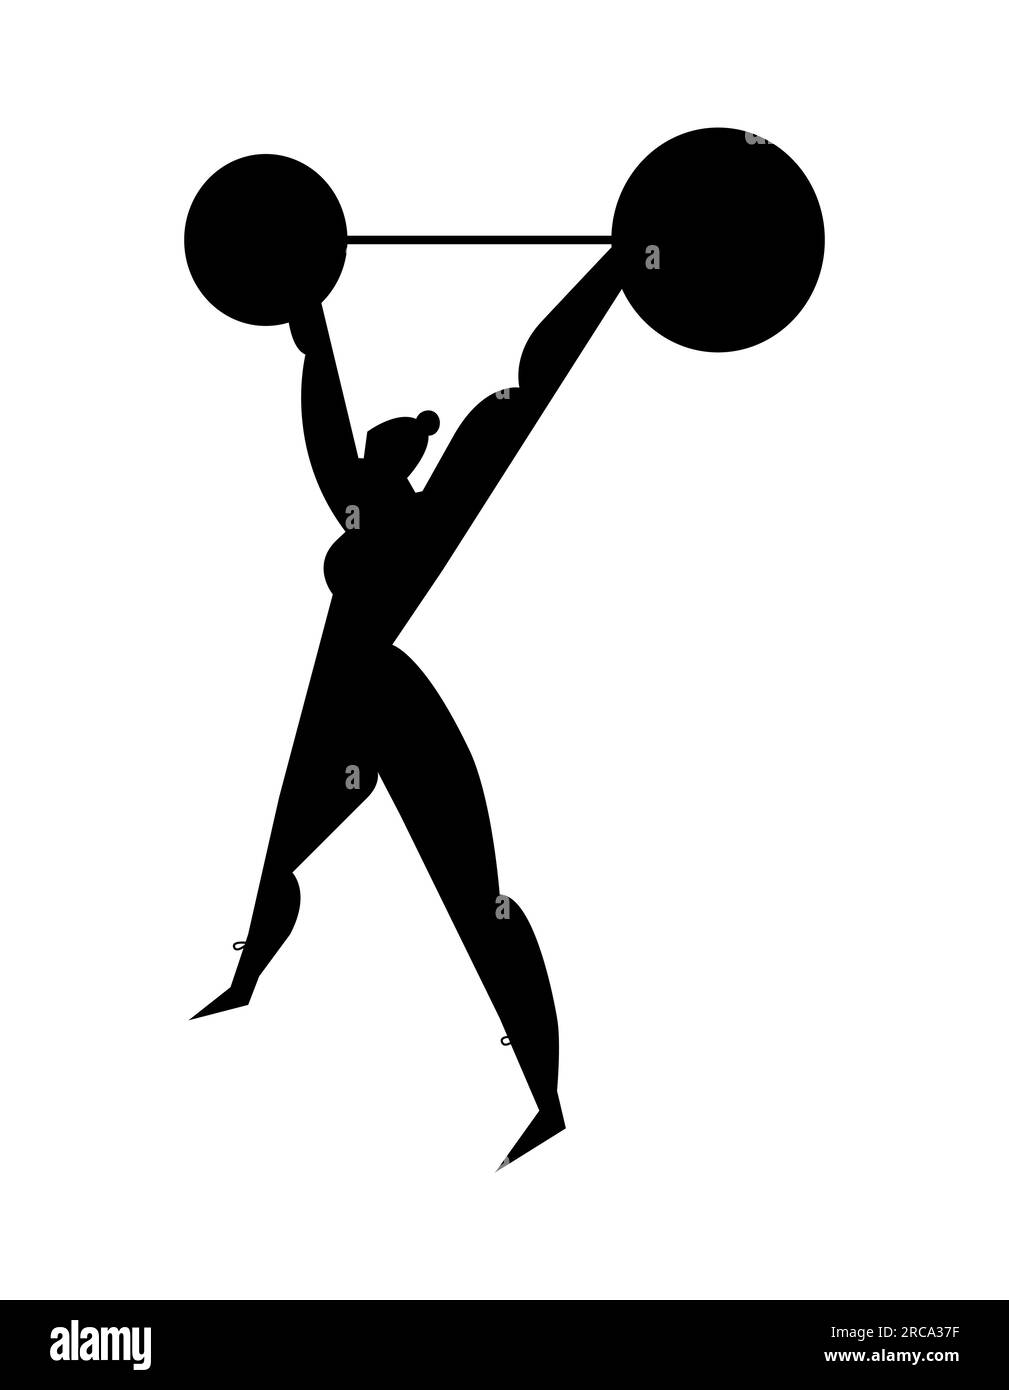 Black silhouette of an Athletic woman lifting a barbell. Gym workout with sports barbell, weightlifting and bodybuilding, healthy lifestyle Stock Vector